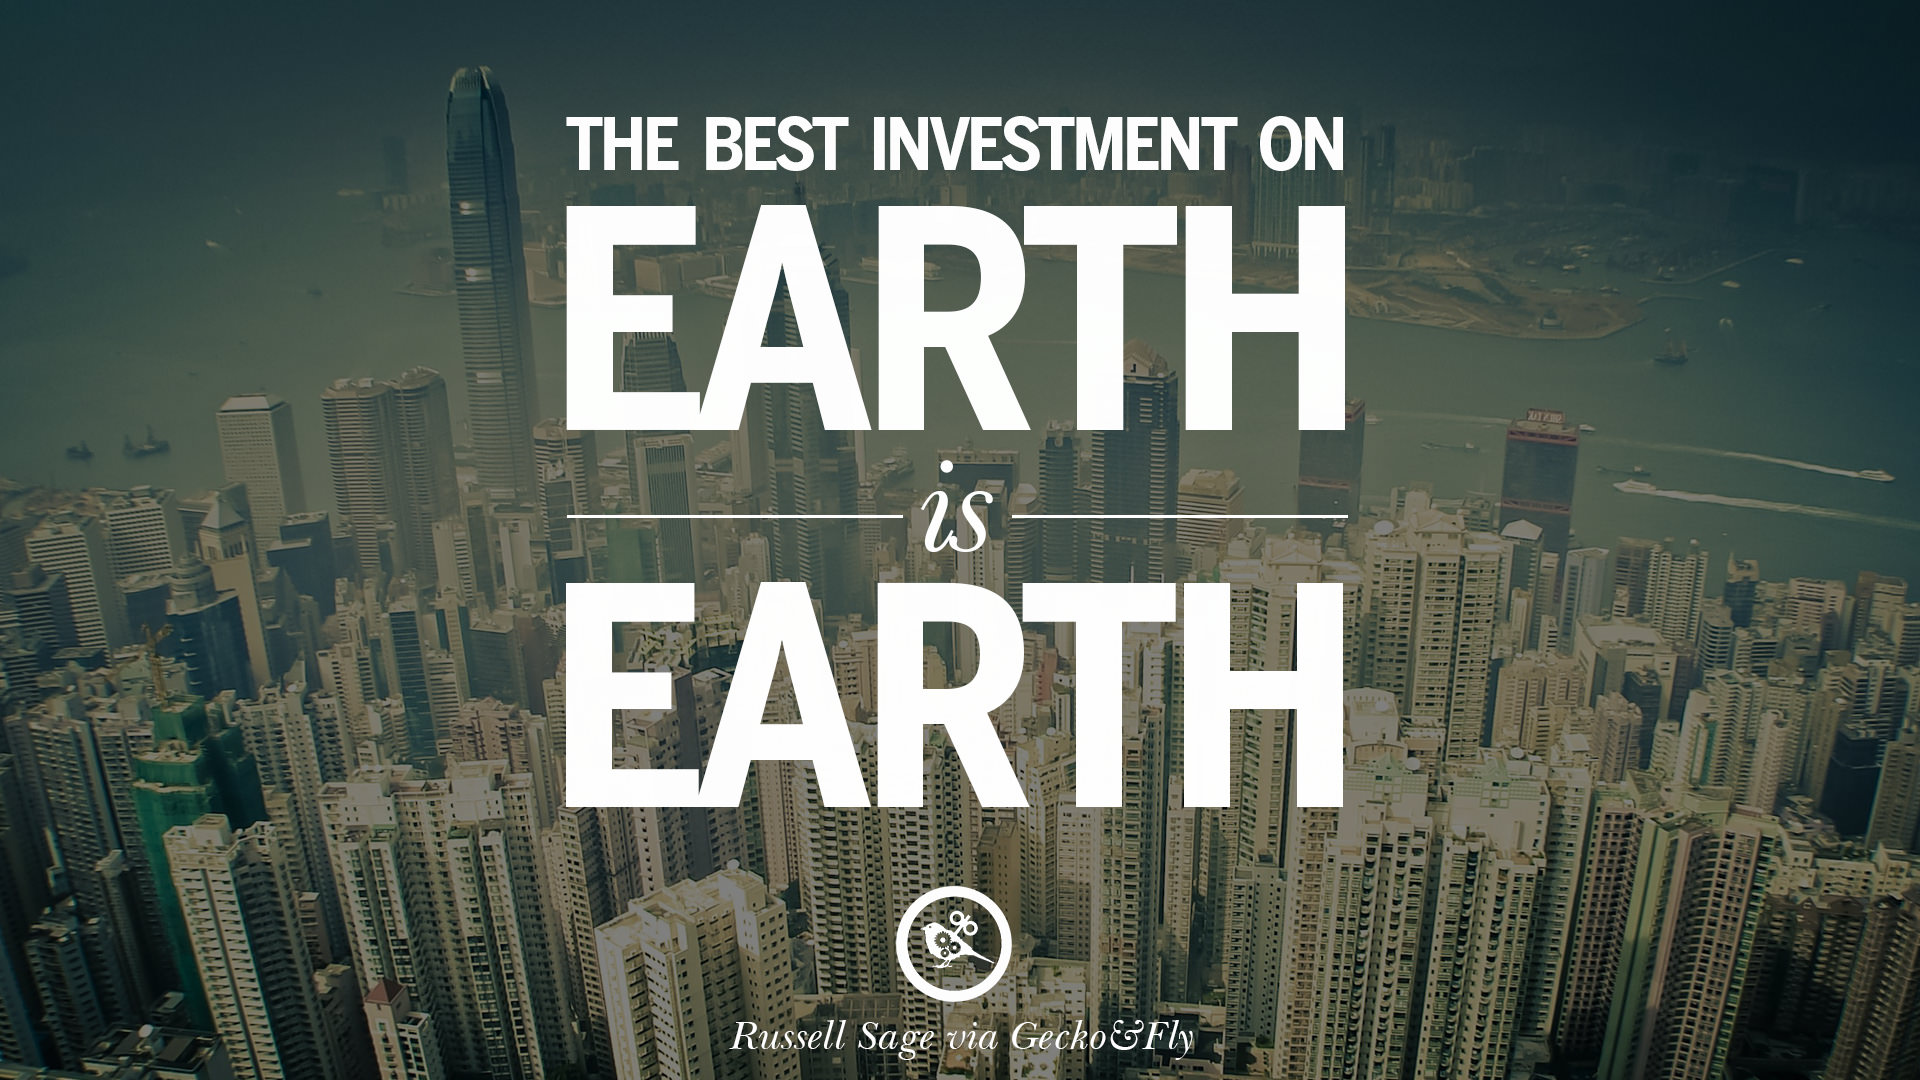 10 Quotes On Real Estate Investing And Property Investment